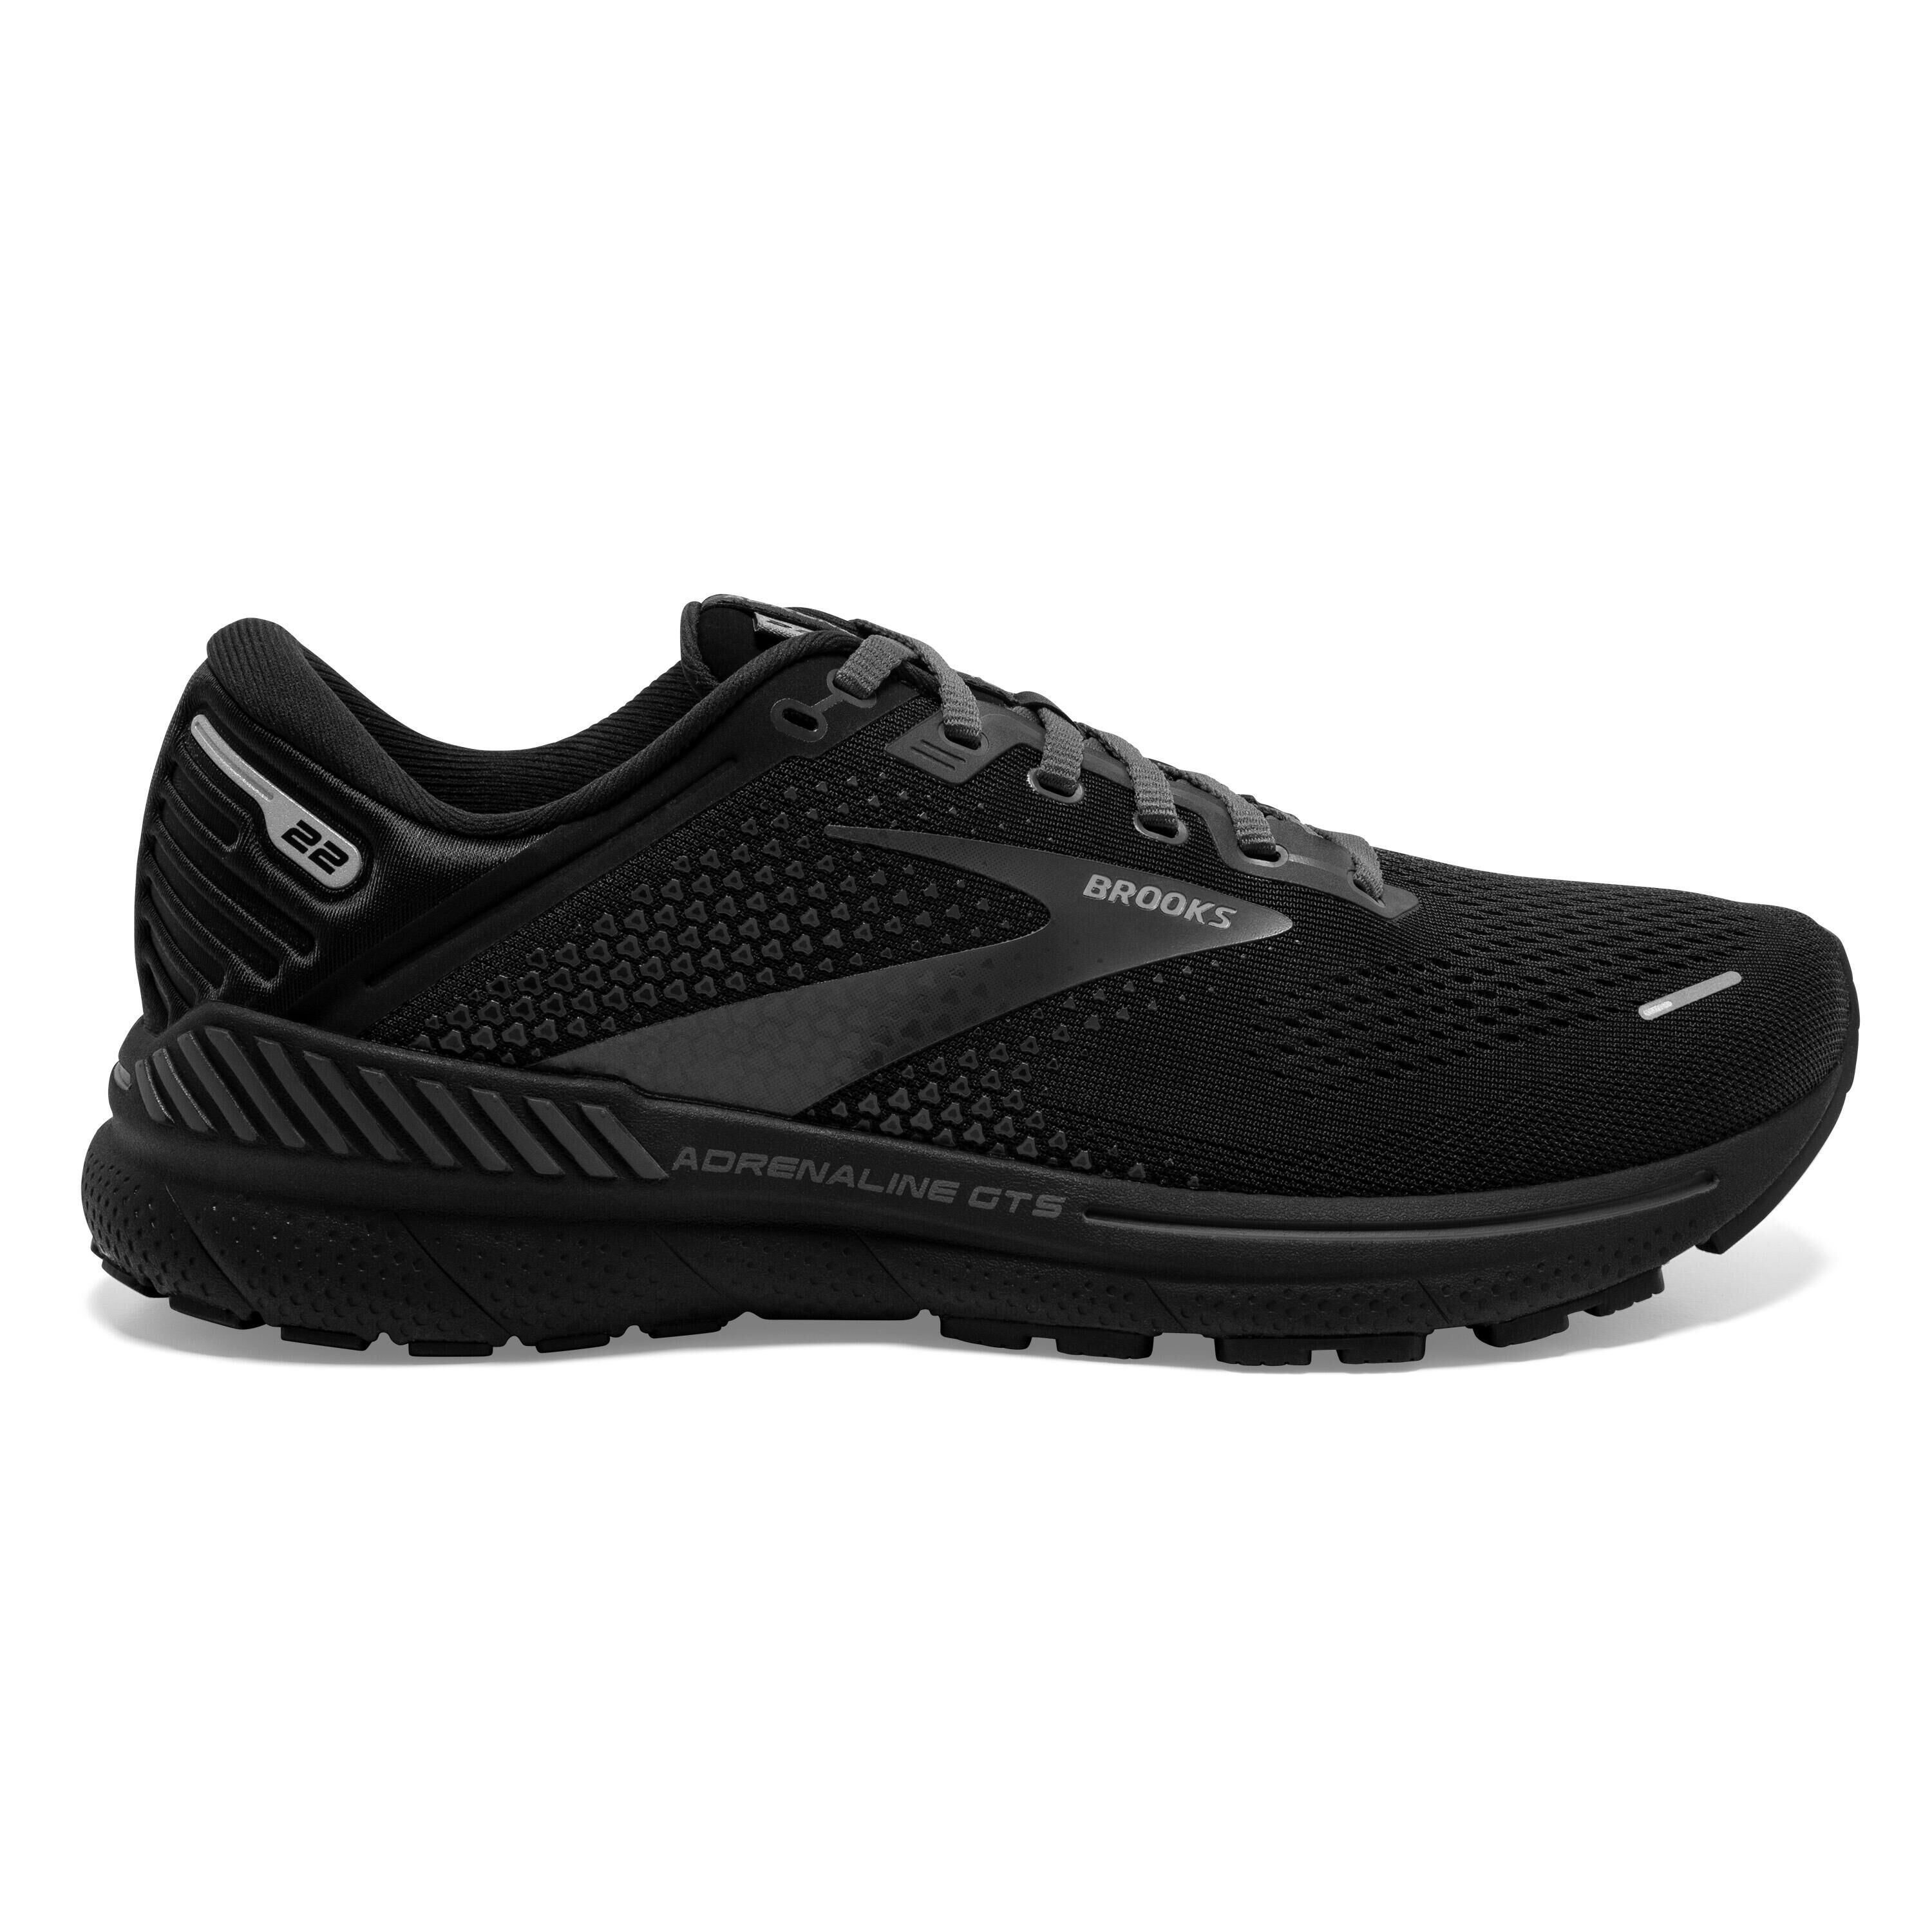 BROOKS Brooks Adrenaline GTS 22 Extra Wide Fit 4E Mens Running Shoes Black